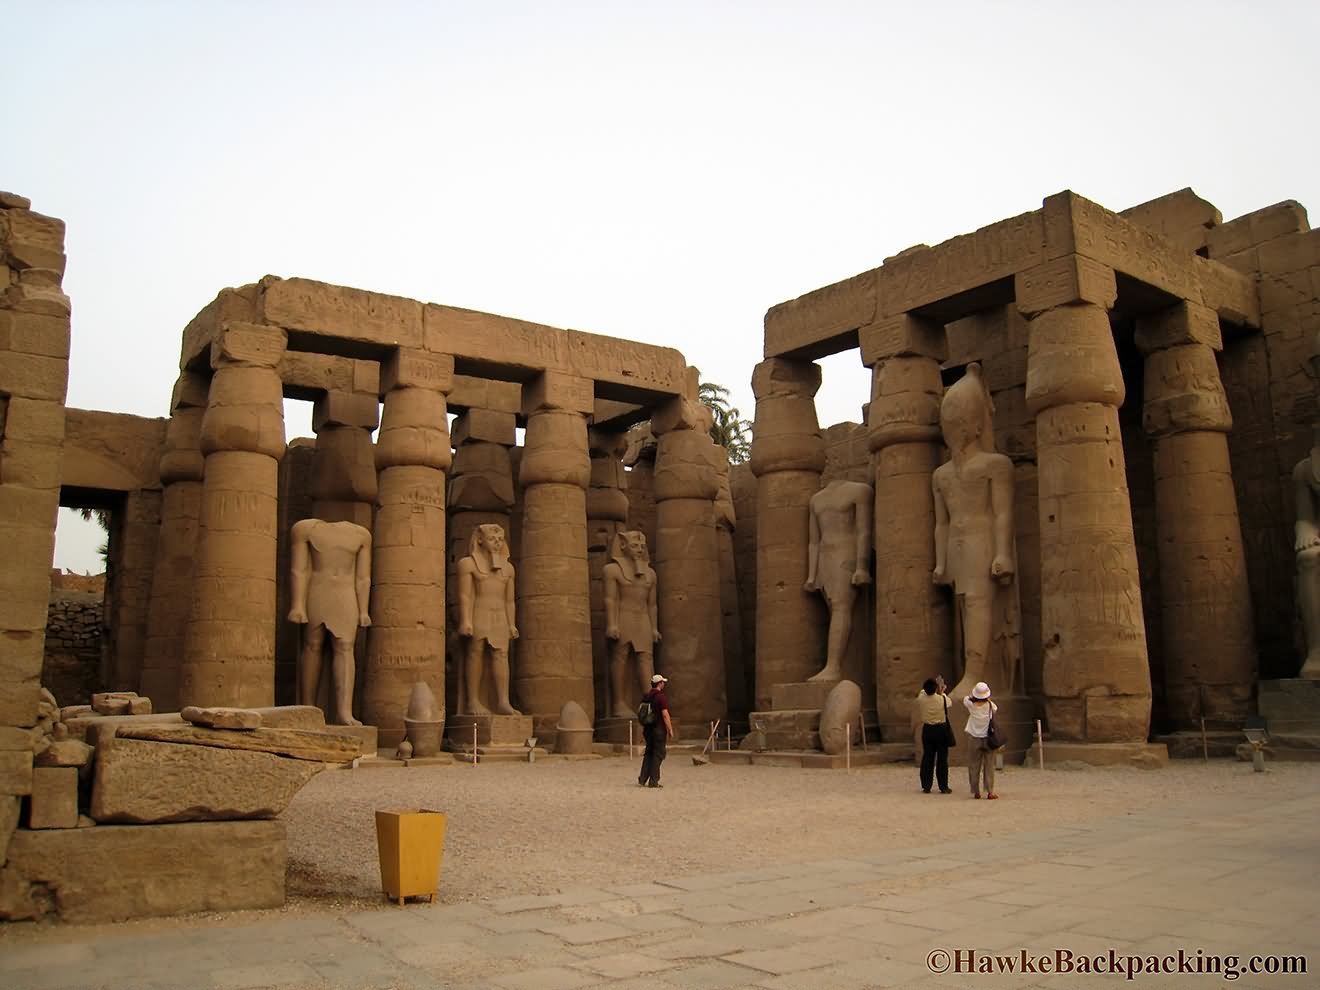 Sculptures At The Luxor Temple, Egypt